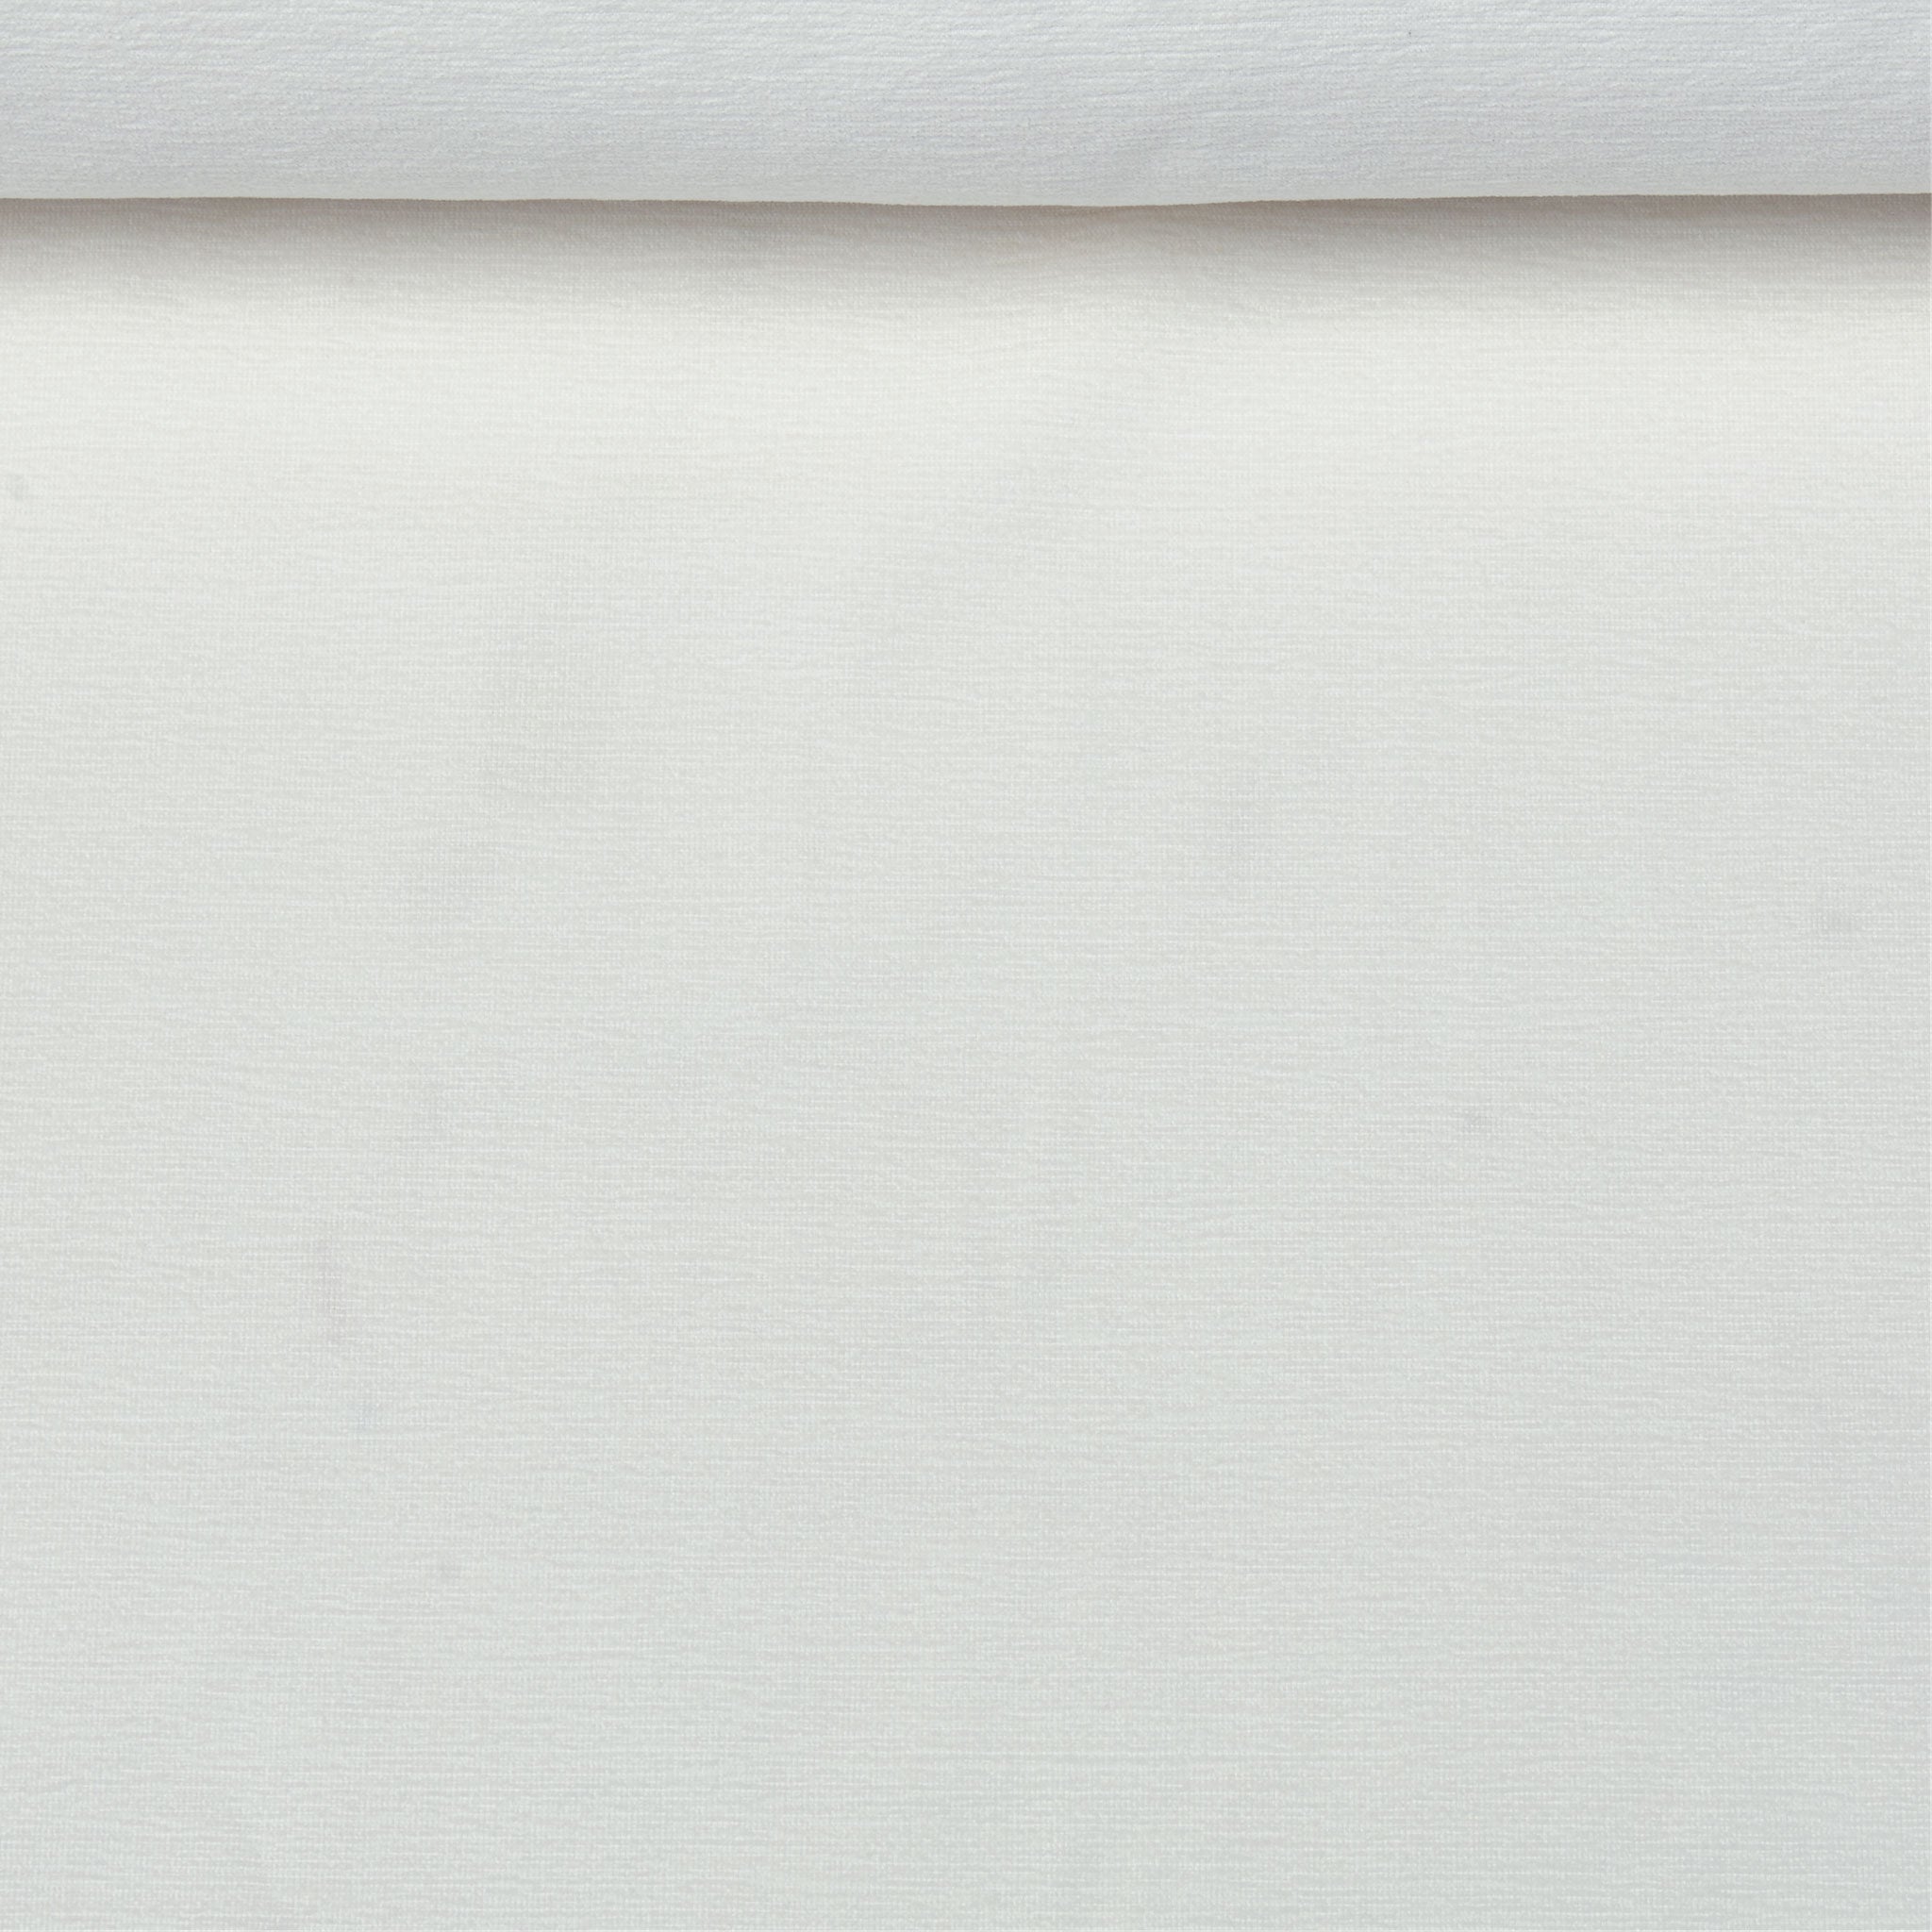 A birds eye view of a jacquard woven white terry toweled pattern outdoor performance fabric roll. 